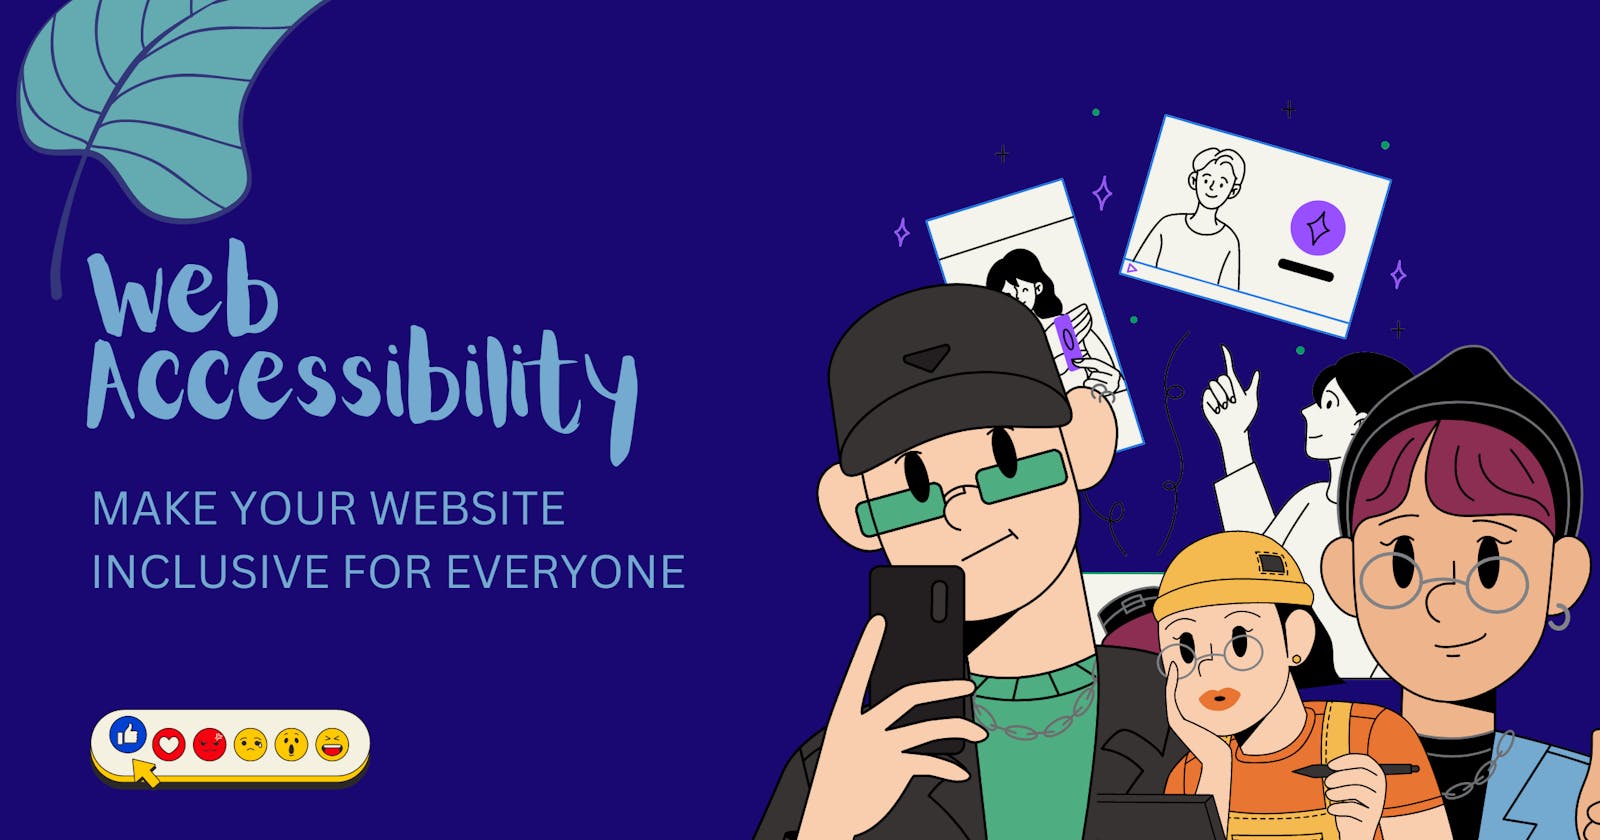 How to Make Your Website Inclusive for Everyone?